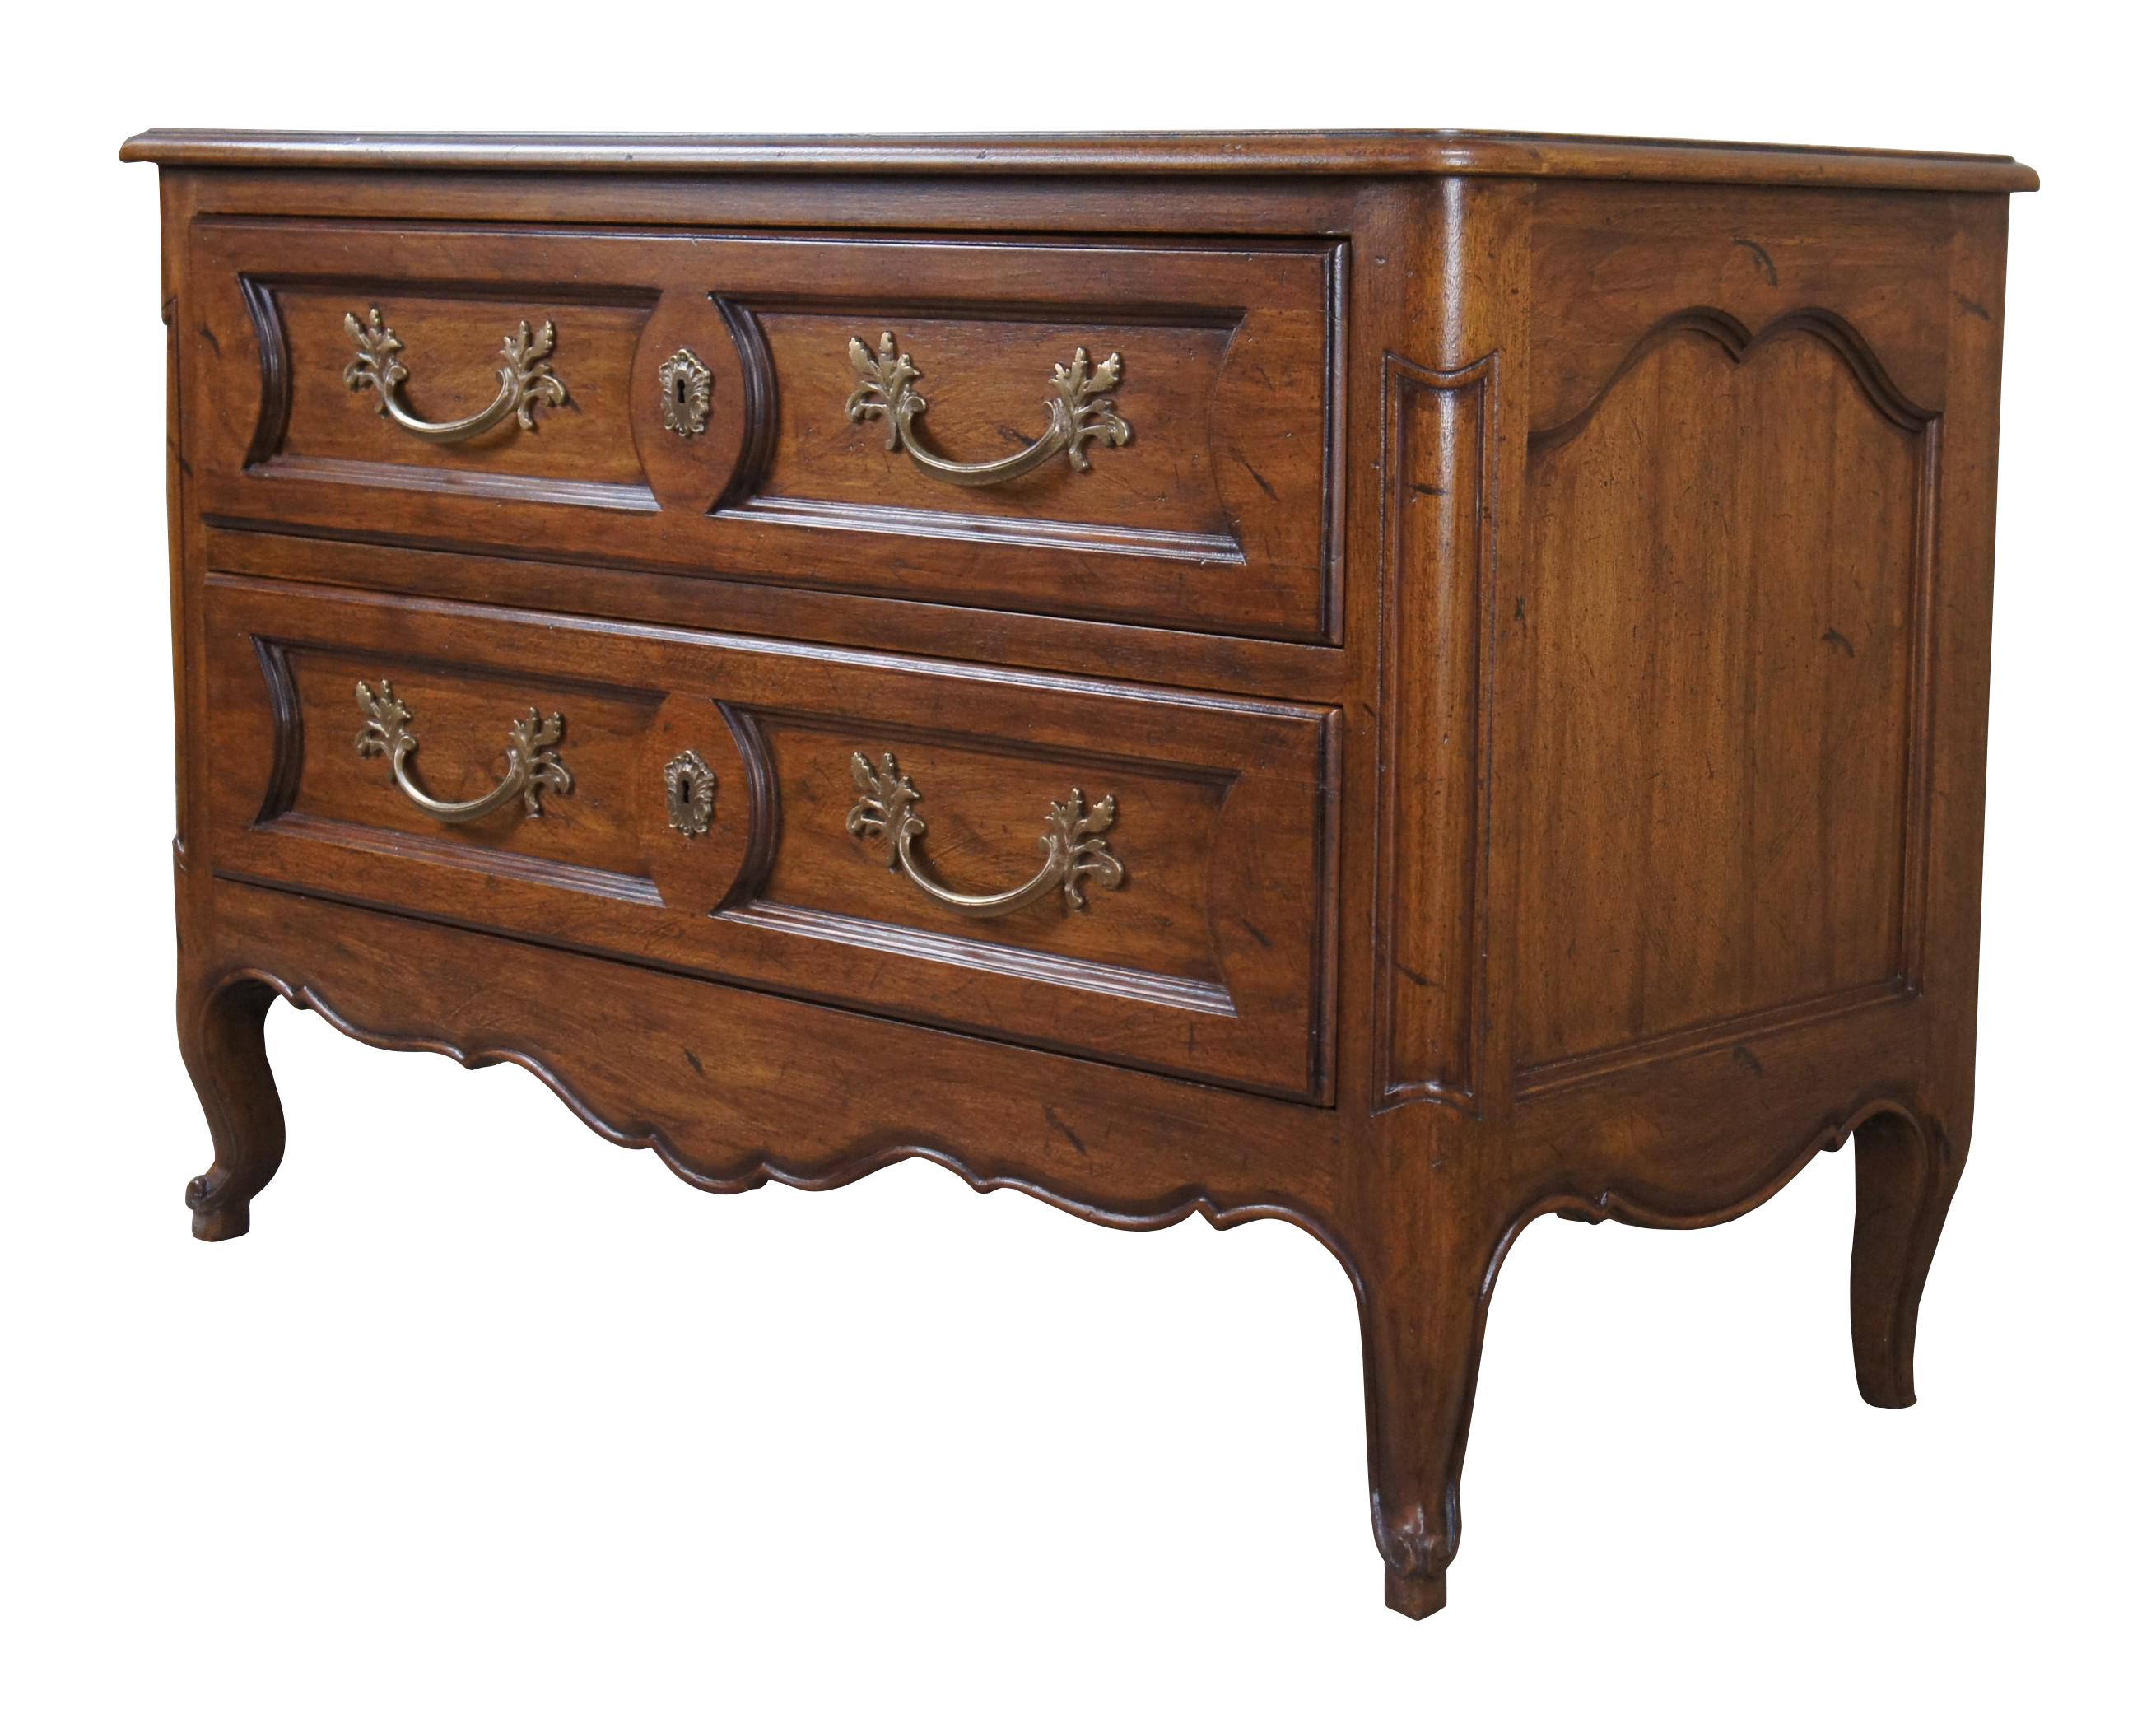 Vintage Mount Airy Walnut French Country Provincial Lowboy Chest Dresser Stand In Good Condition For Sale In Dayton, OH